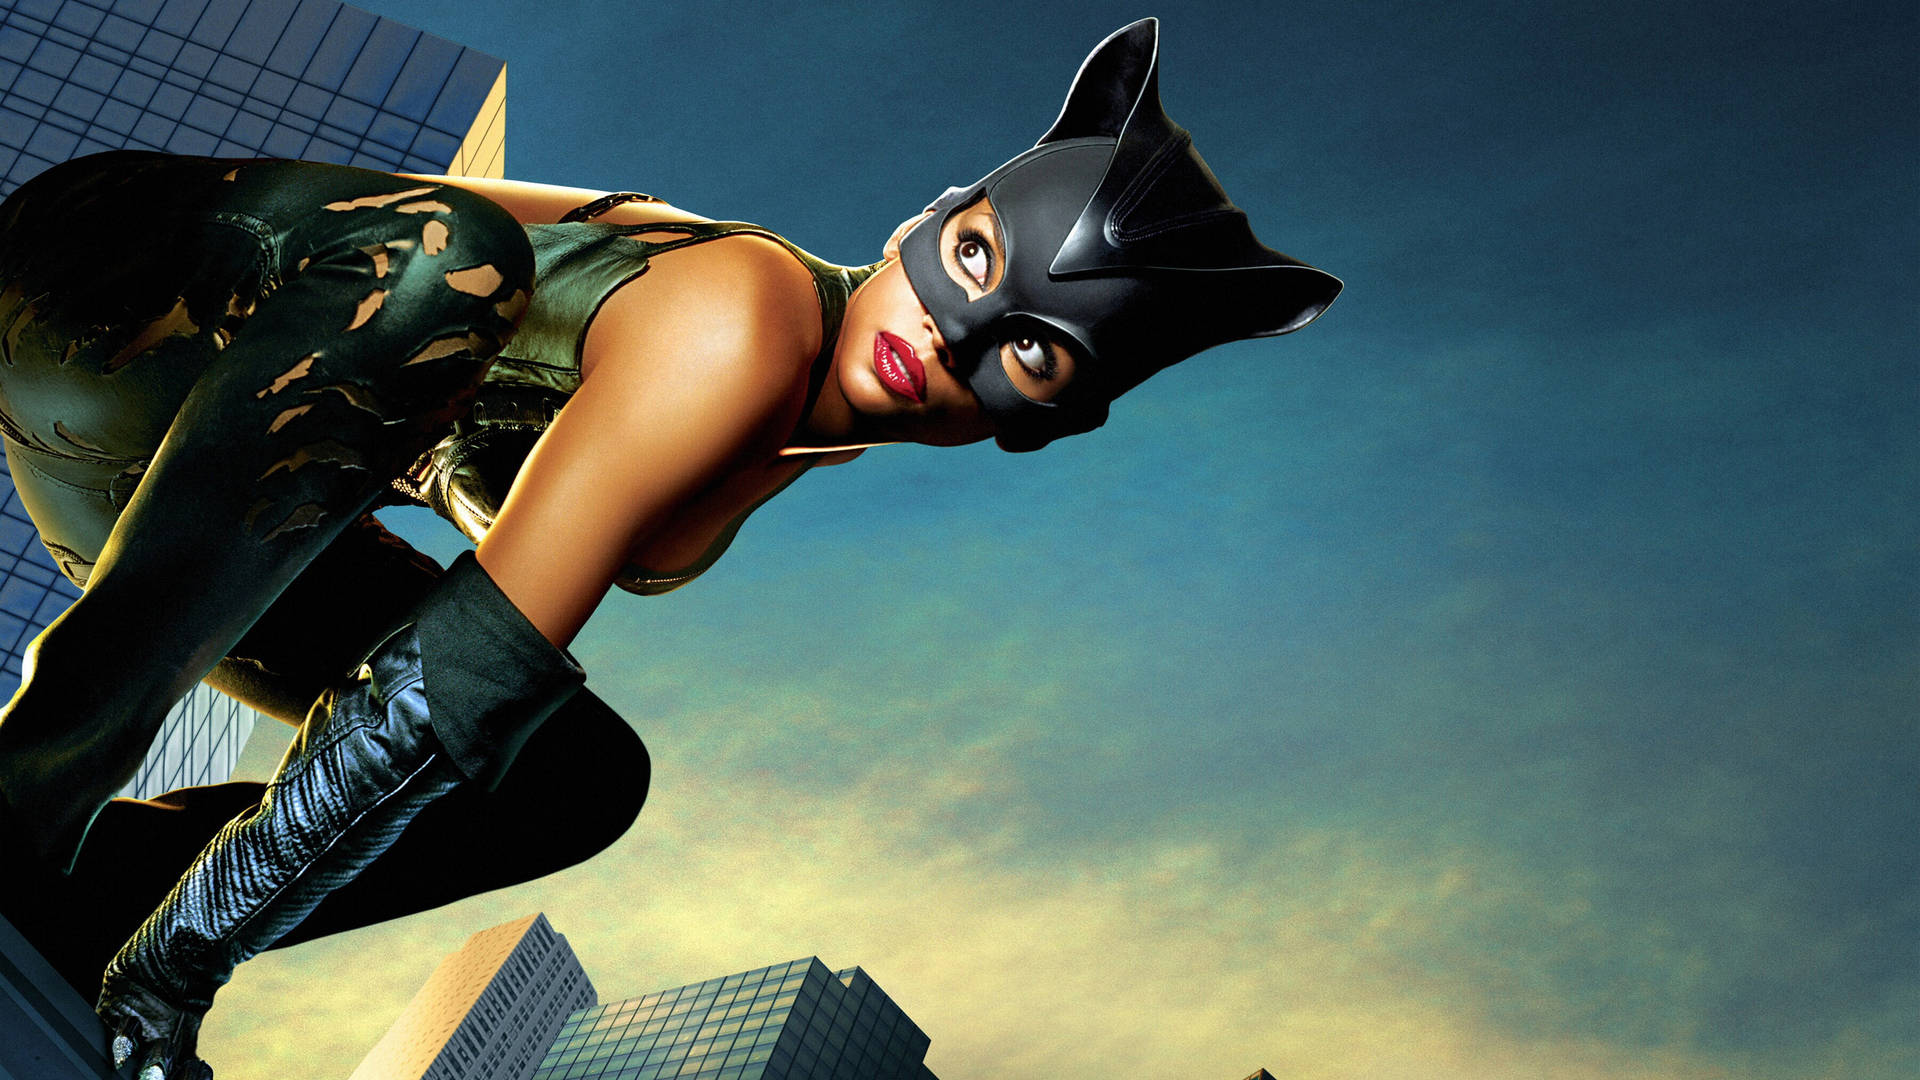 Halle Berry As Catwoman Wallpaper